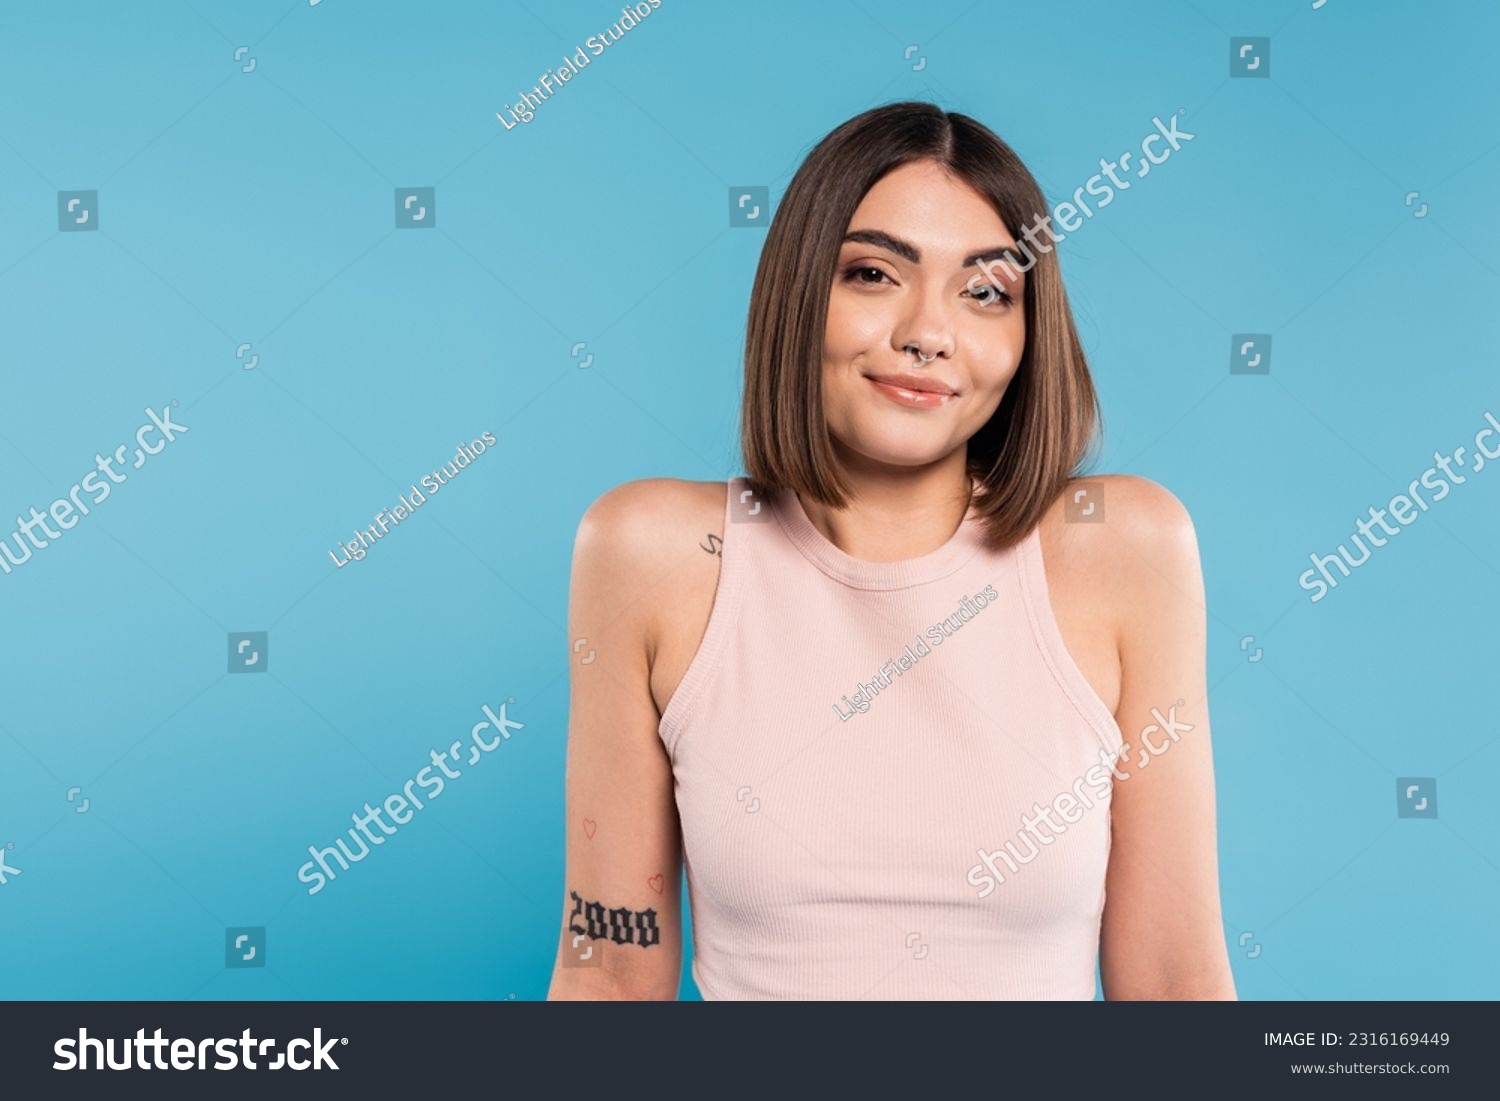 not knowing, smiling young woman with tattoos and nose piercing standing in tank top on blue background, looking at camera, confused, pretty face, generation z, summer outfit #2316169449